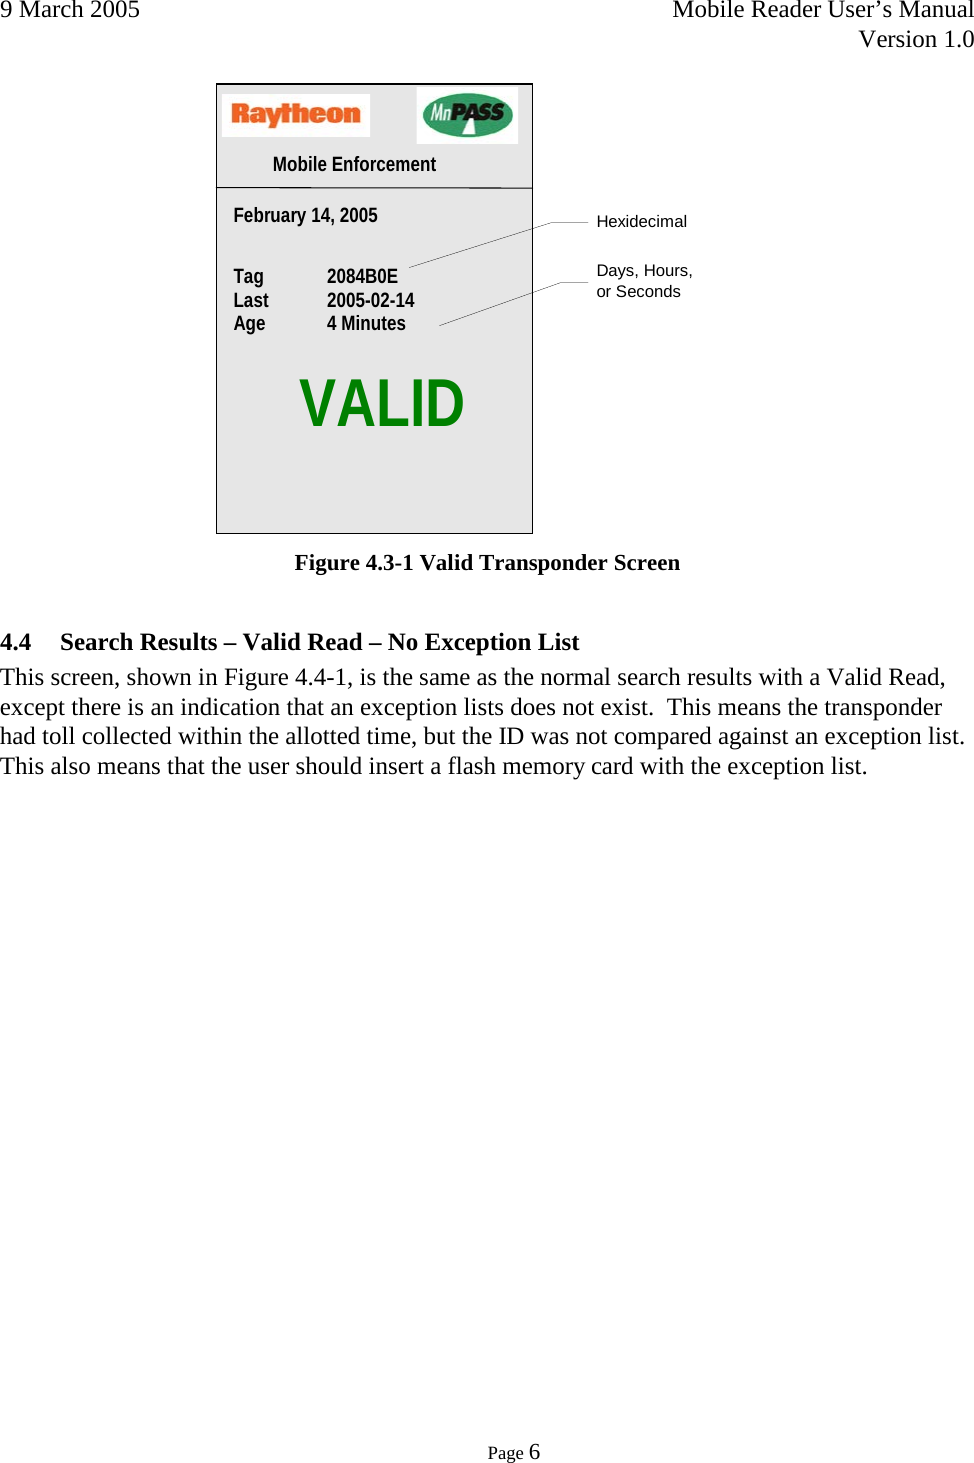 9 March 2005    Mobile Reader User’s Manual   Version 1.0      Page 6   Figure 4.3-1 Valid Transponder Screen 4.4 Search Results – Valid Read – No Exception List This screen, shown in Figure 4.4-1, is the same as the normal search results with a Valid Read, except there is an indication that an exception lists does not exist.  This means the transponder had toll collected within the allotted time, but the ID was not compared against an exception list.  This also means that the user should insert a flash memory card with the exception list.      VALID Mobile Enforcement  Days, Hours,  or Seconds Hexidecimal Tag  2084B0E Last  2005-02-14   Age 4 Minutes  February 14, 2005   